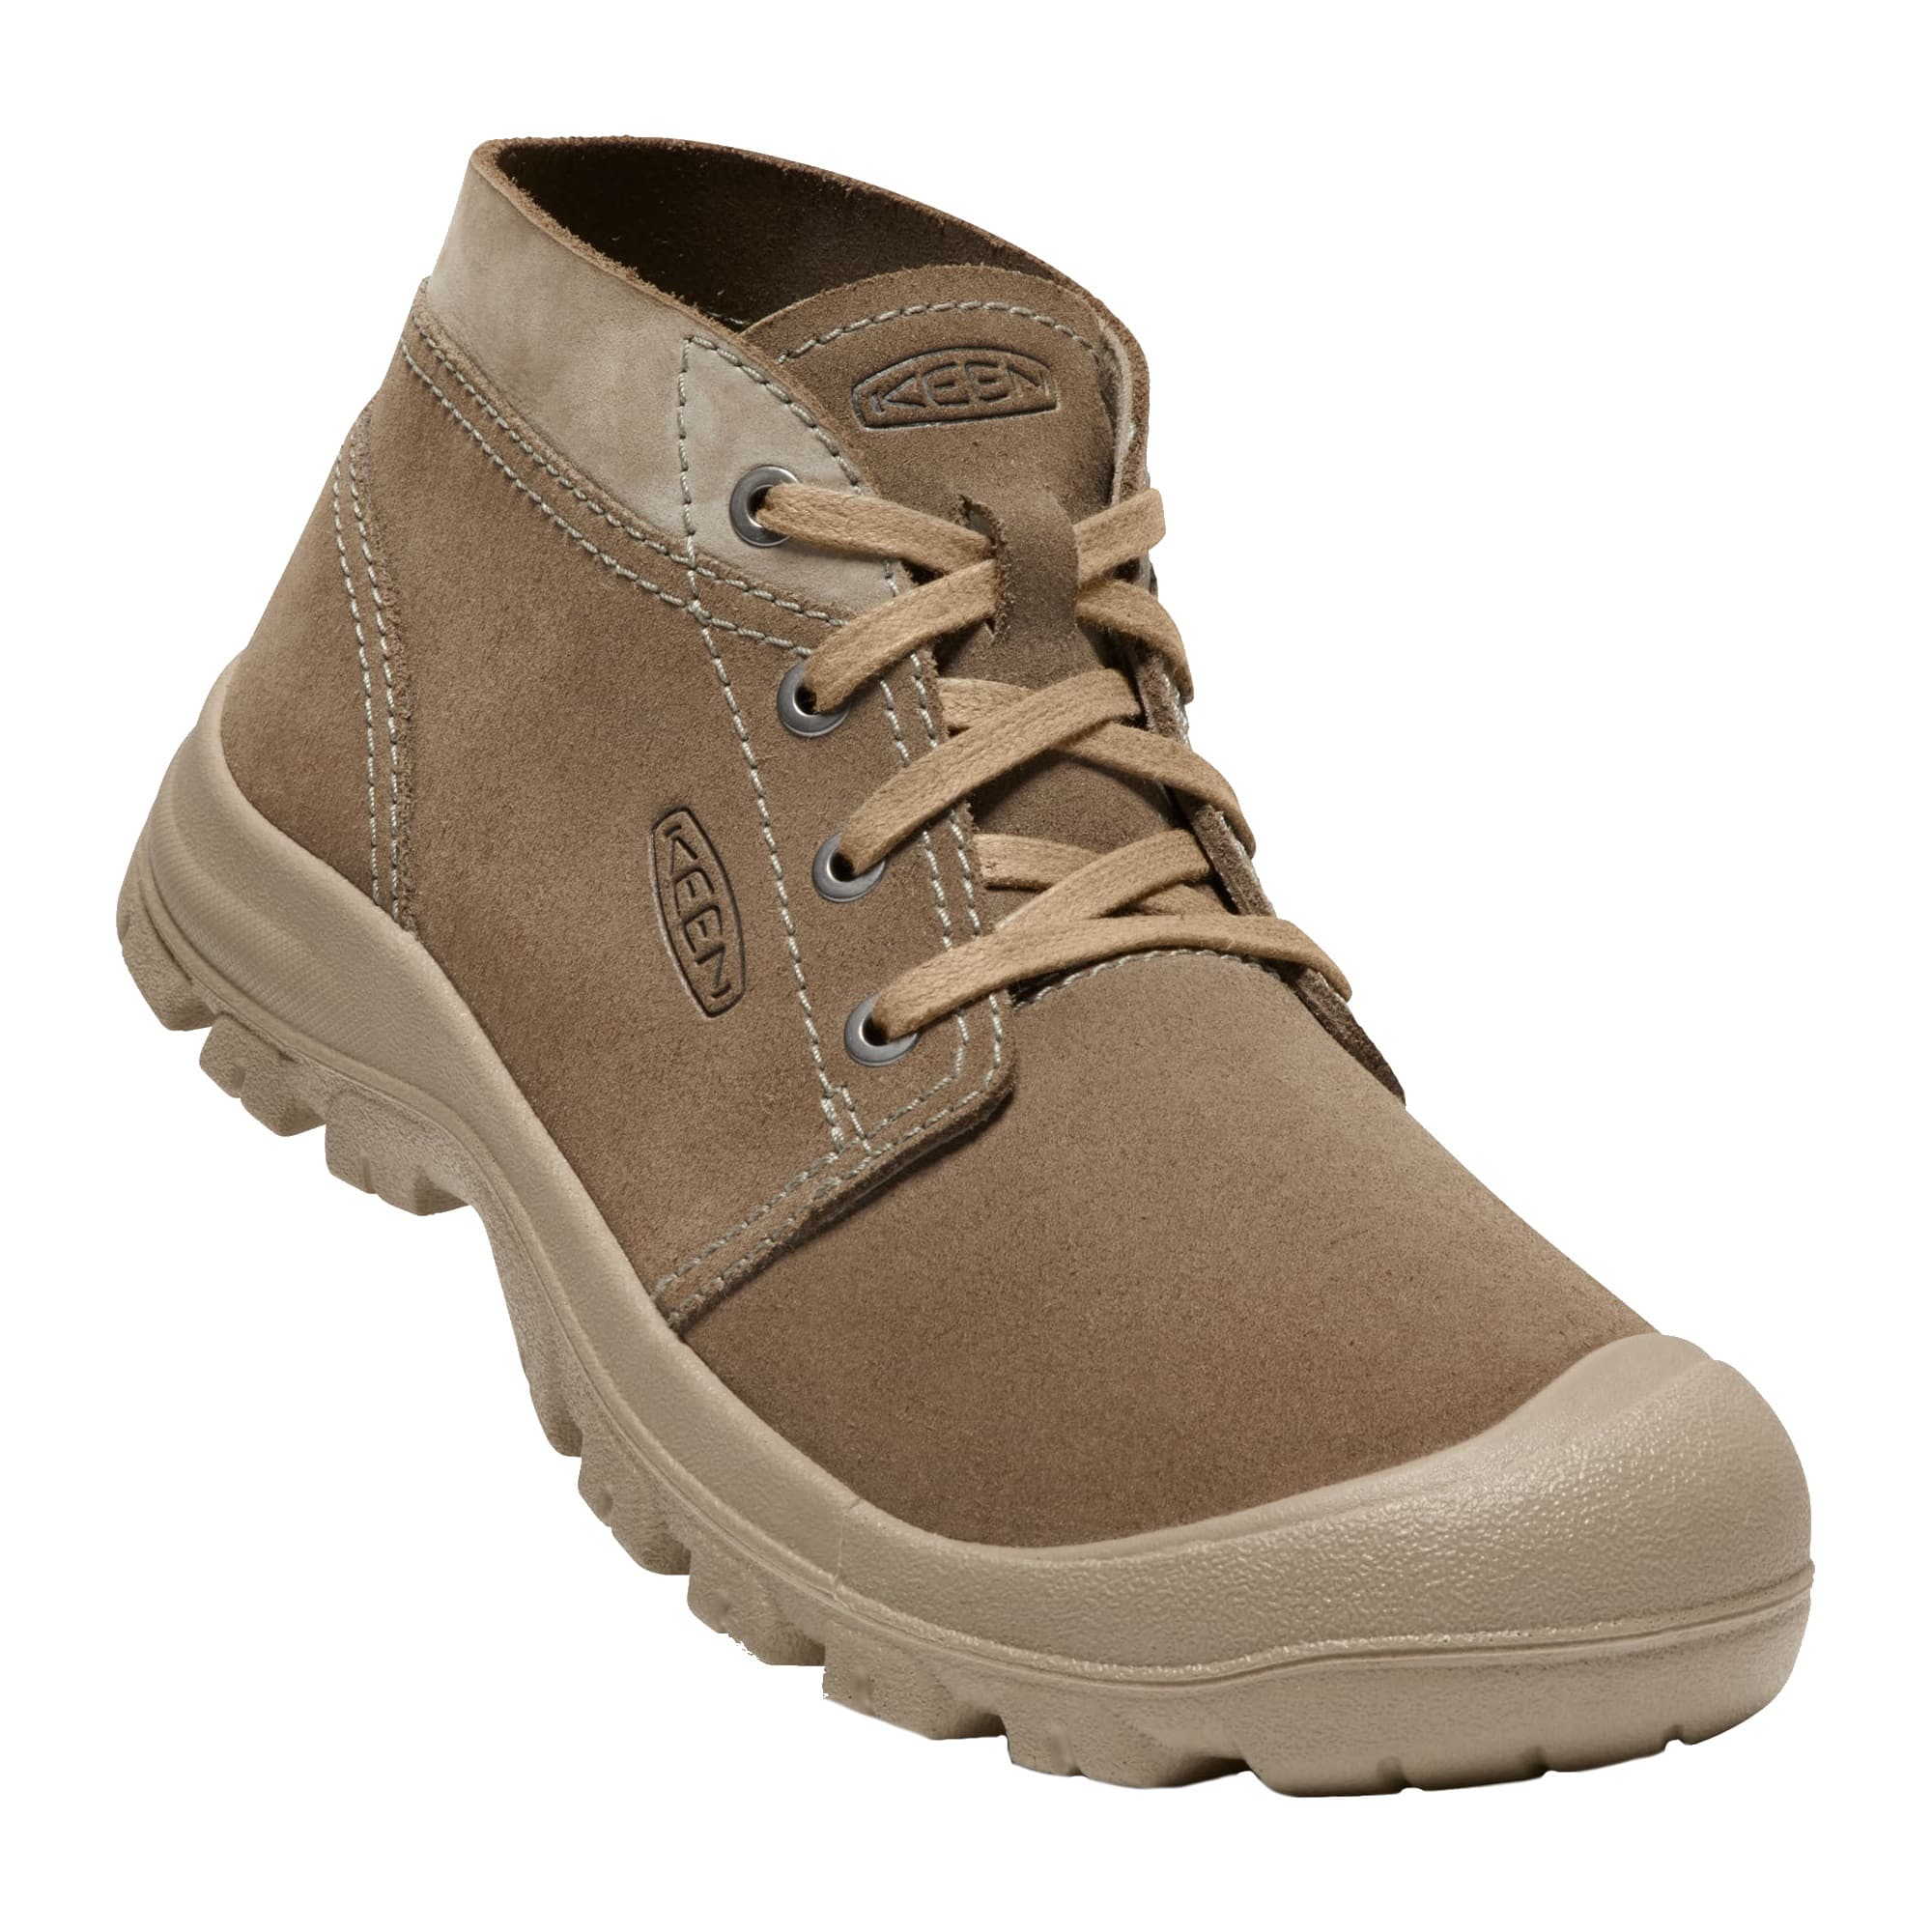 Buy Keen Men's Grayson Chukka from Outnorth